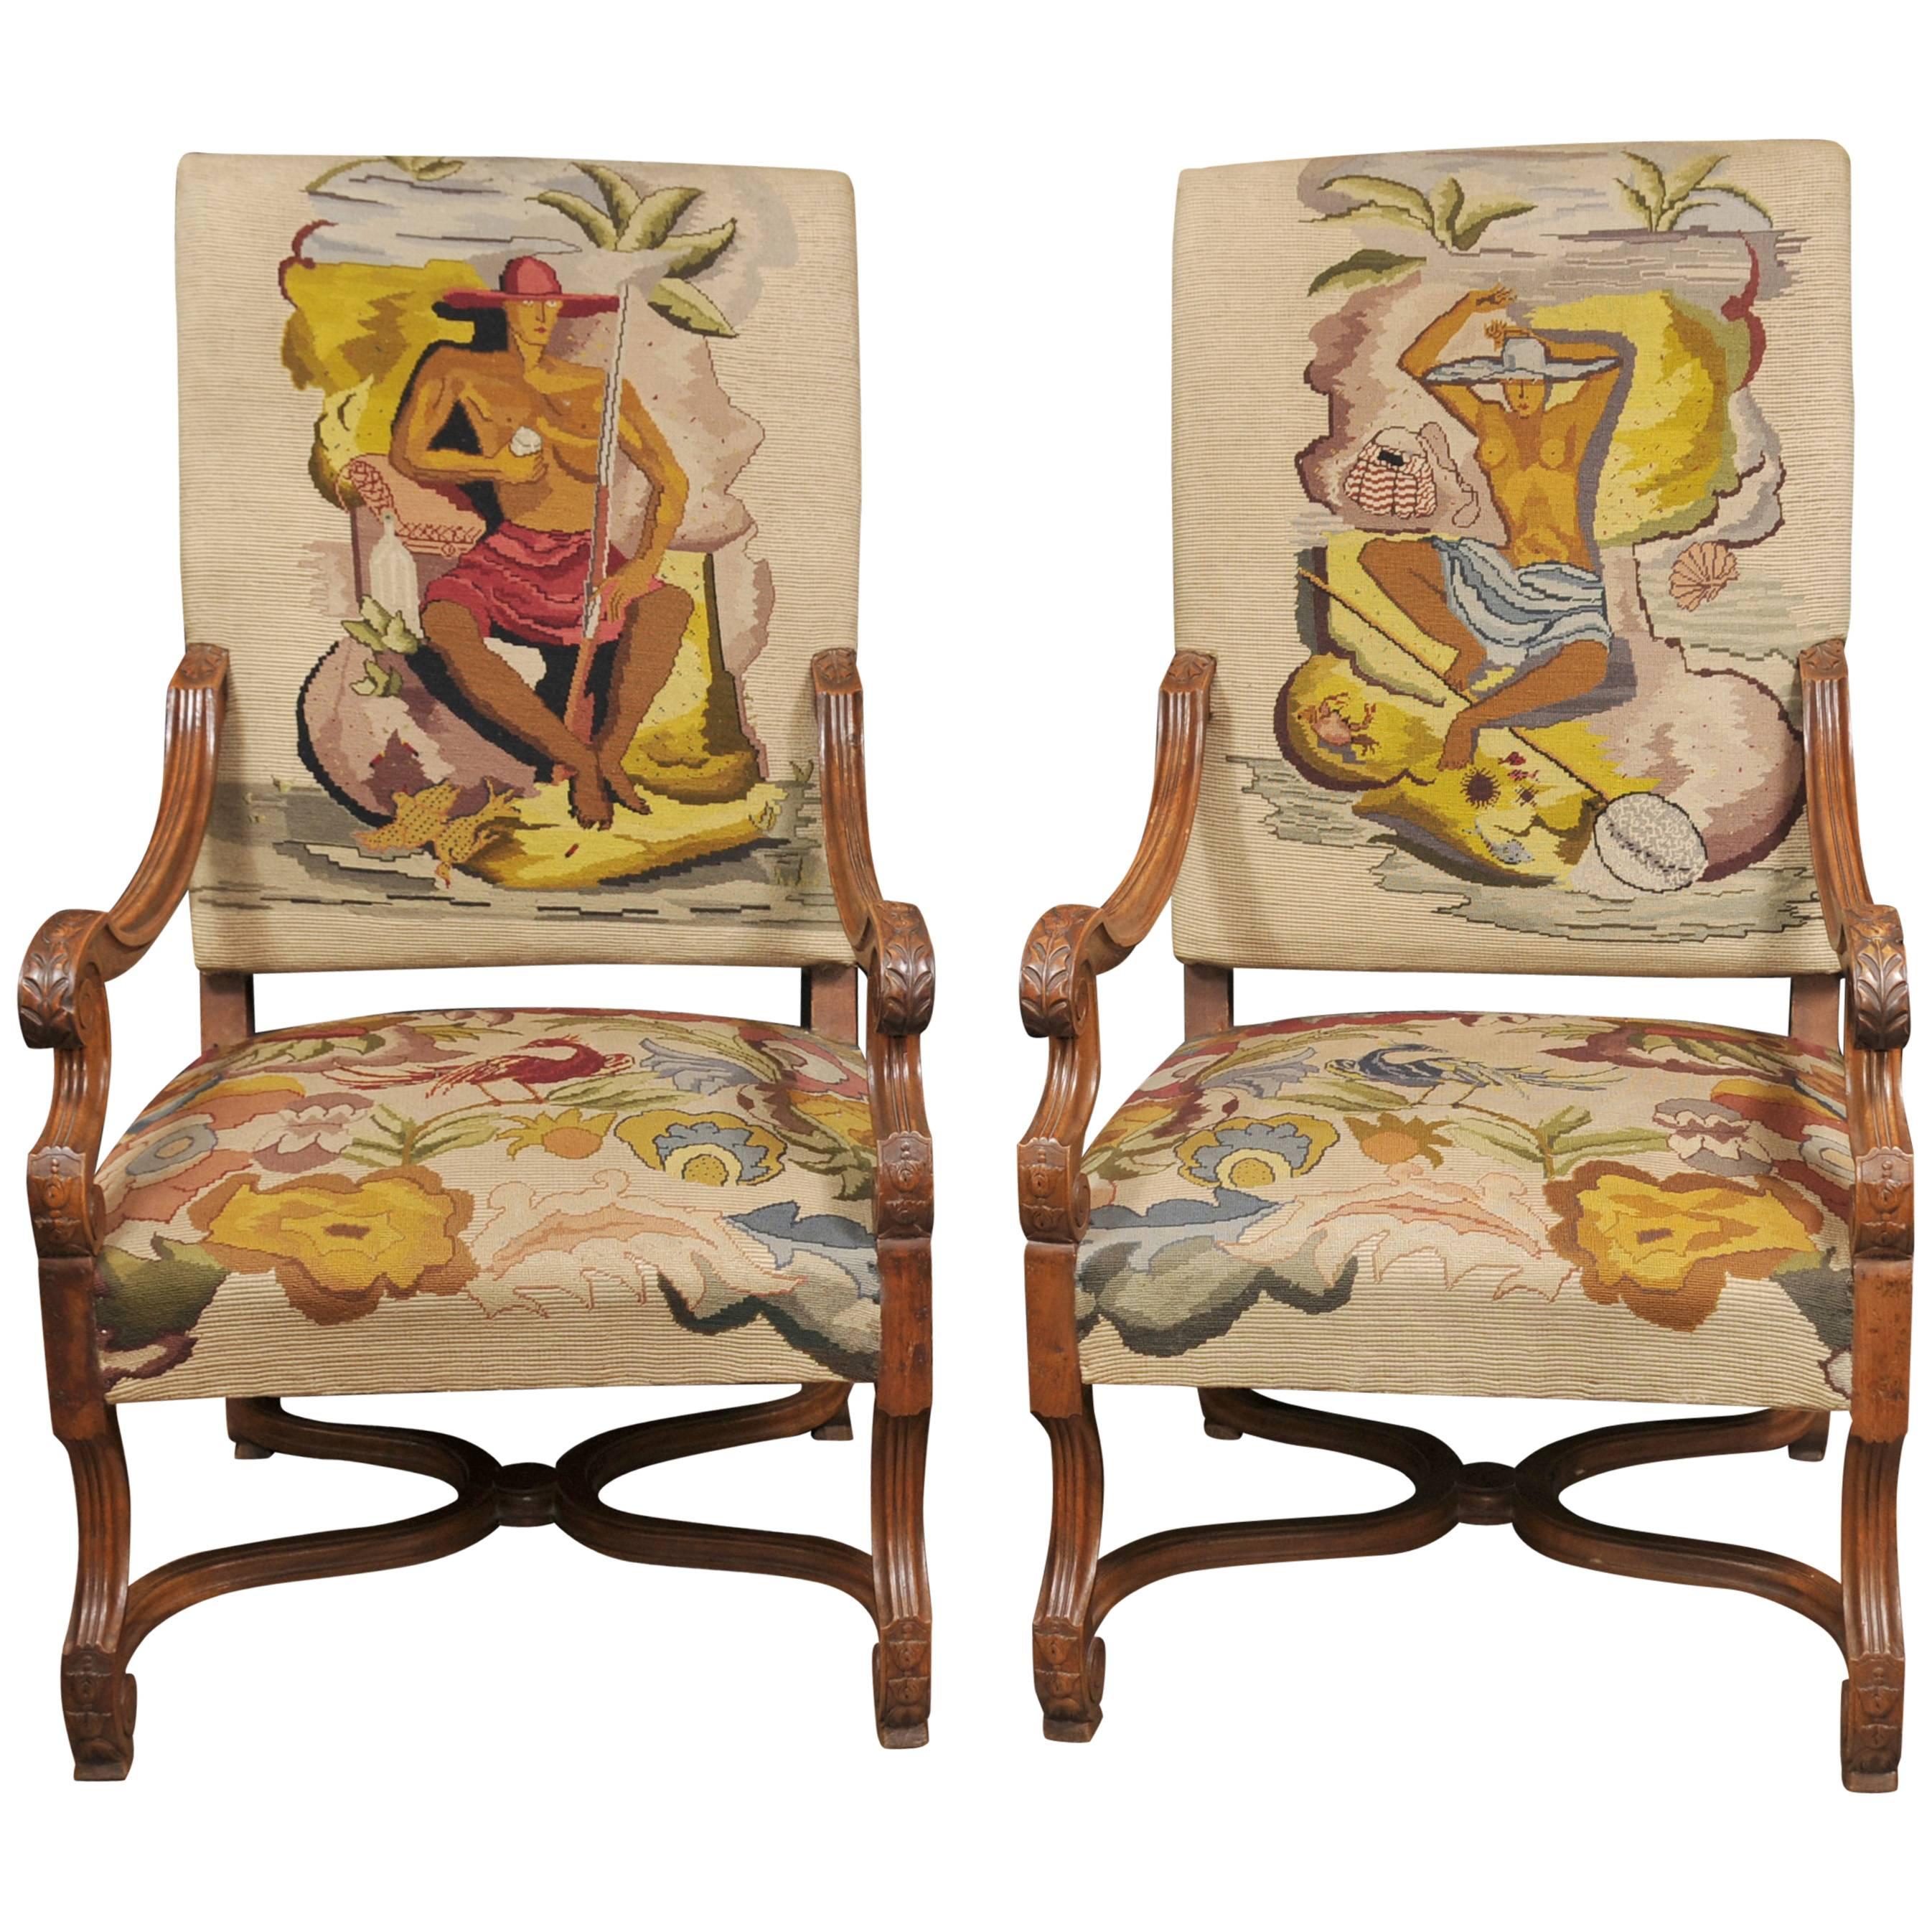 Pair of French Antique Oak Armchairs Nude Handwoven Upholstery Tropical Nouveau